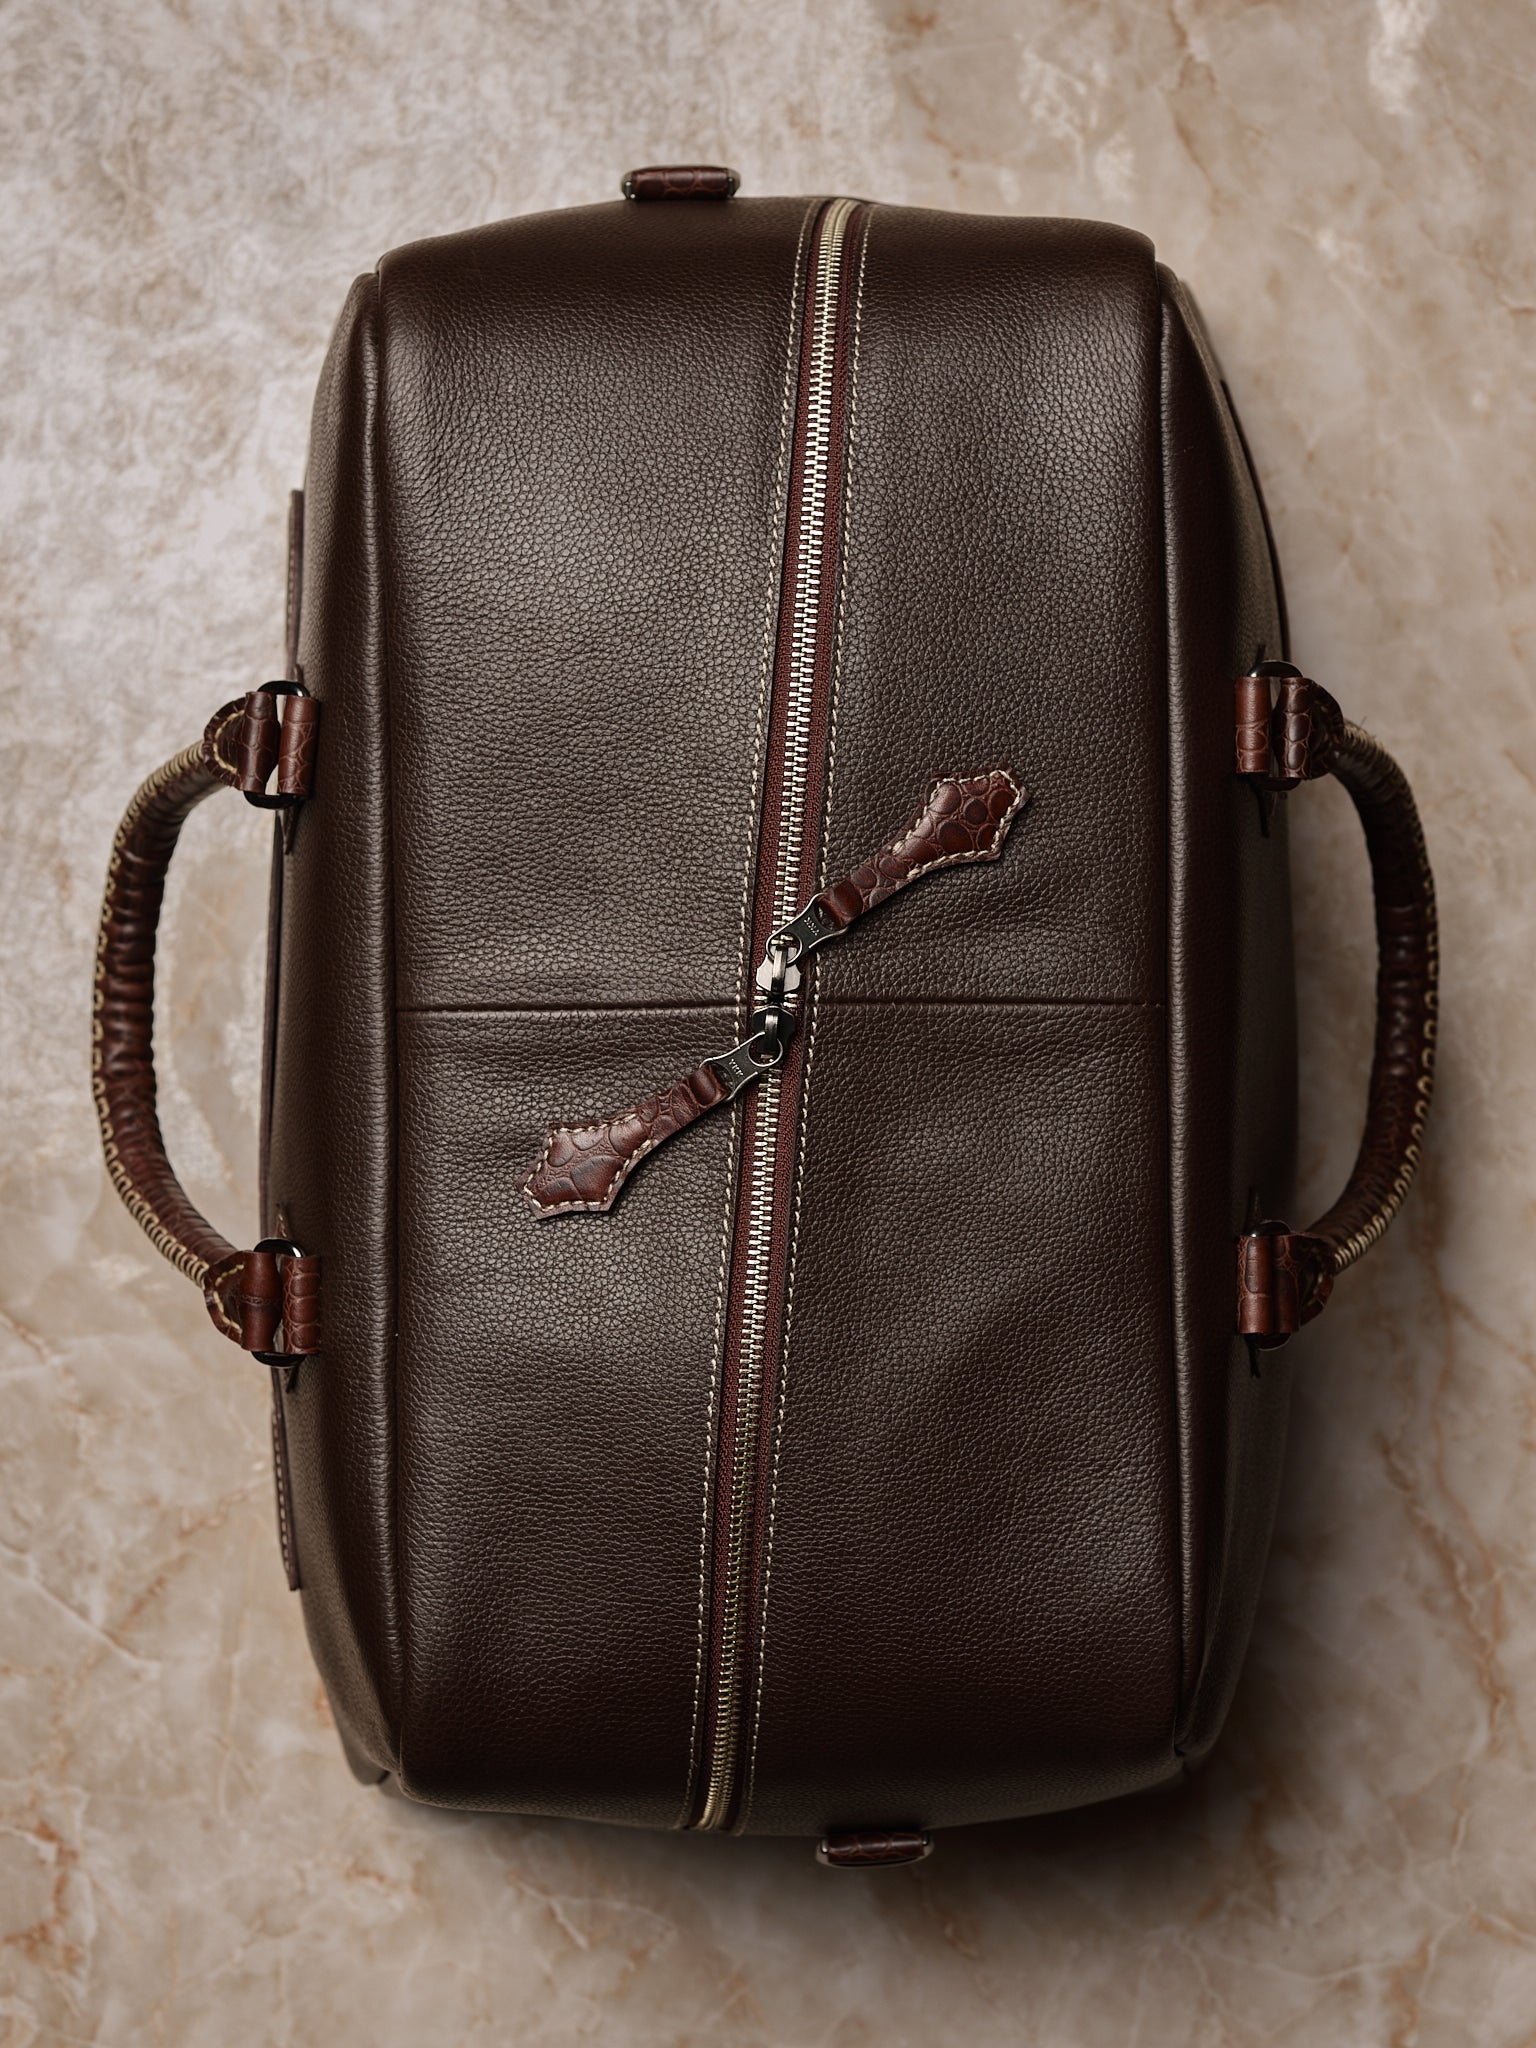 Hand-stitched handles. Duffle Bag Carry On Dark Brown by Capra Leather